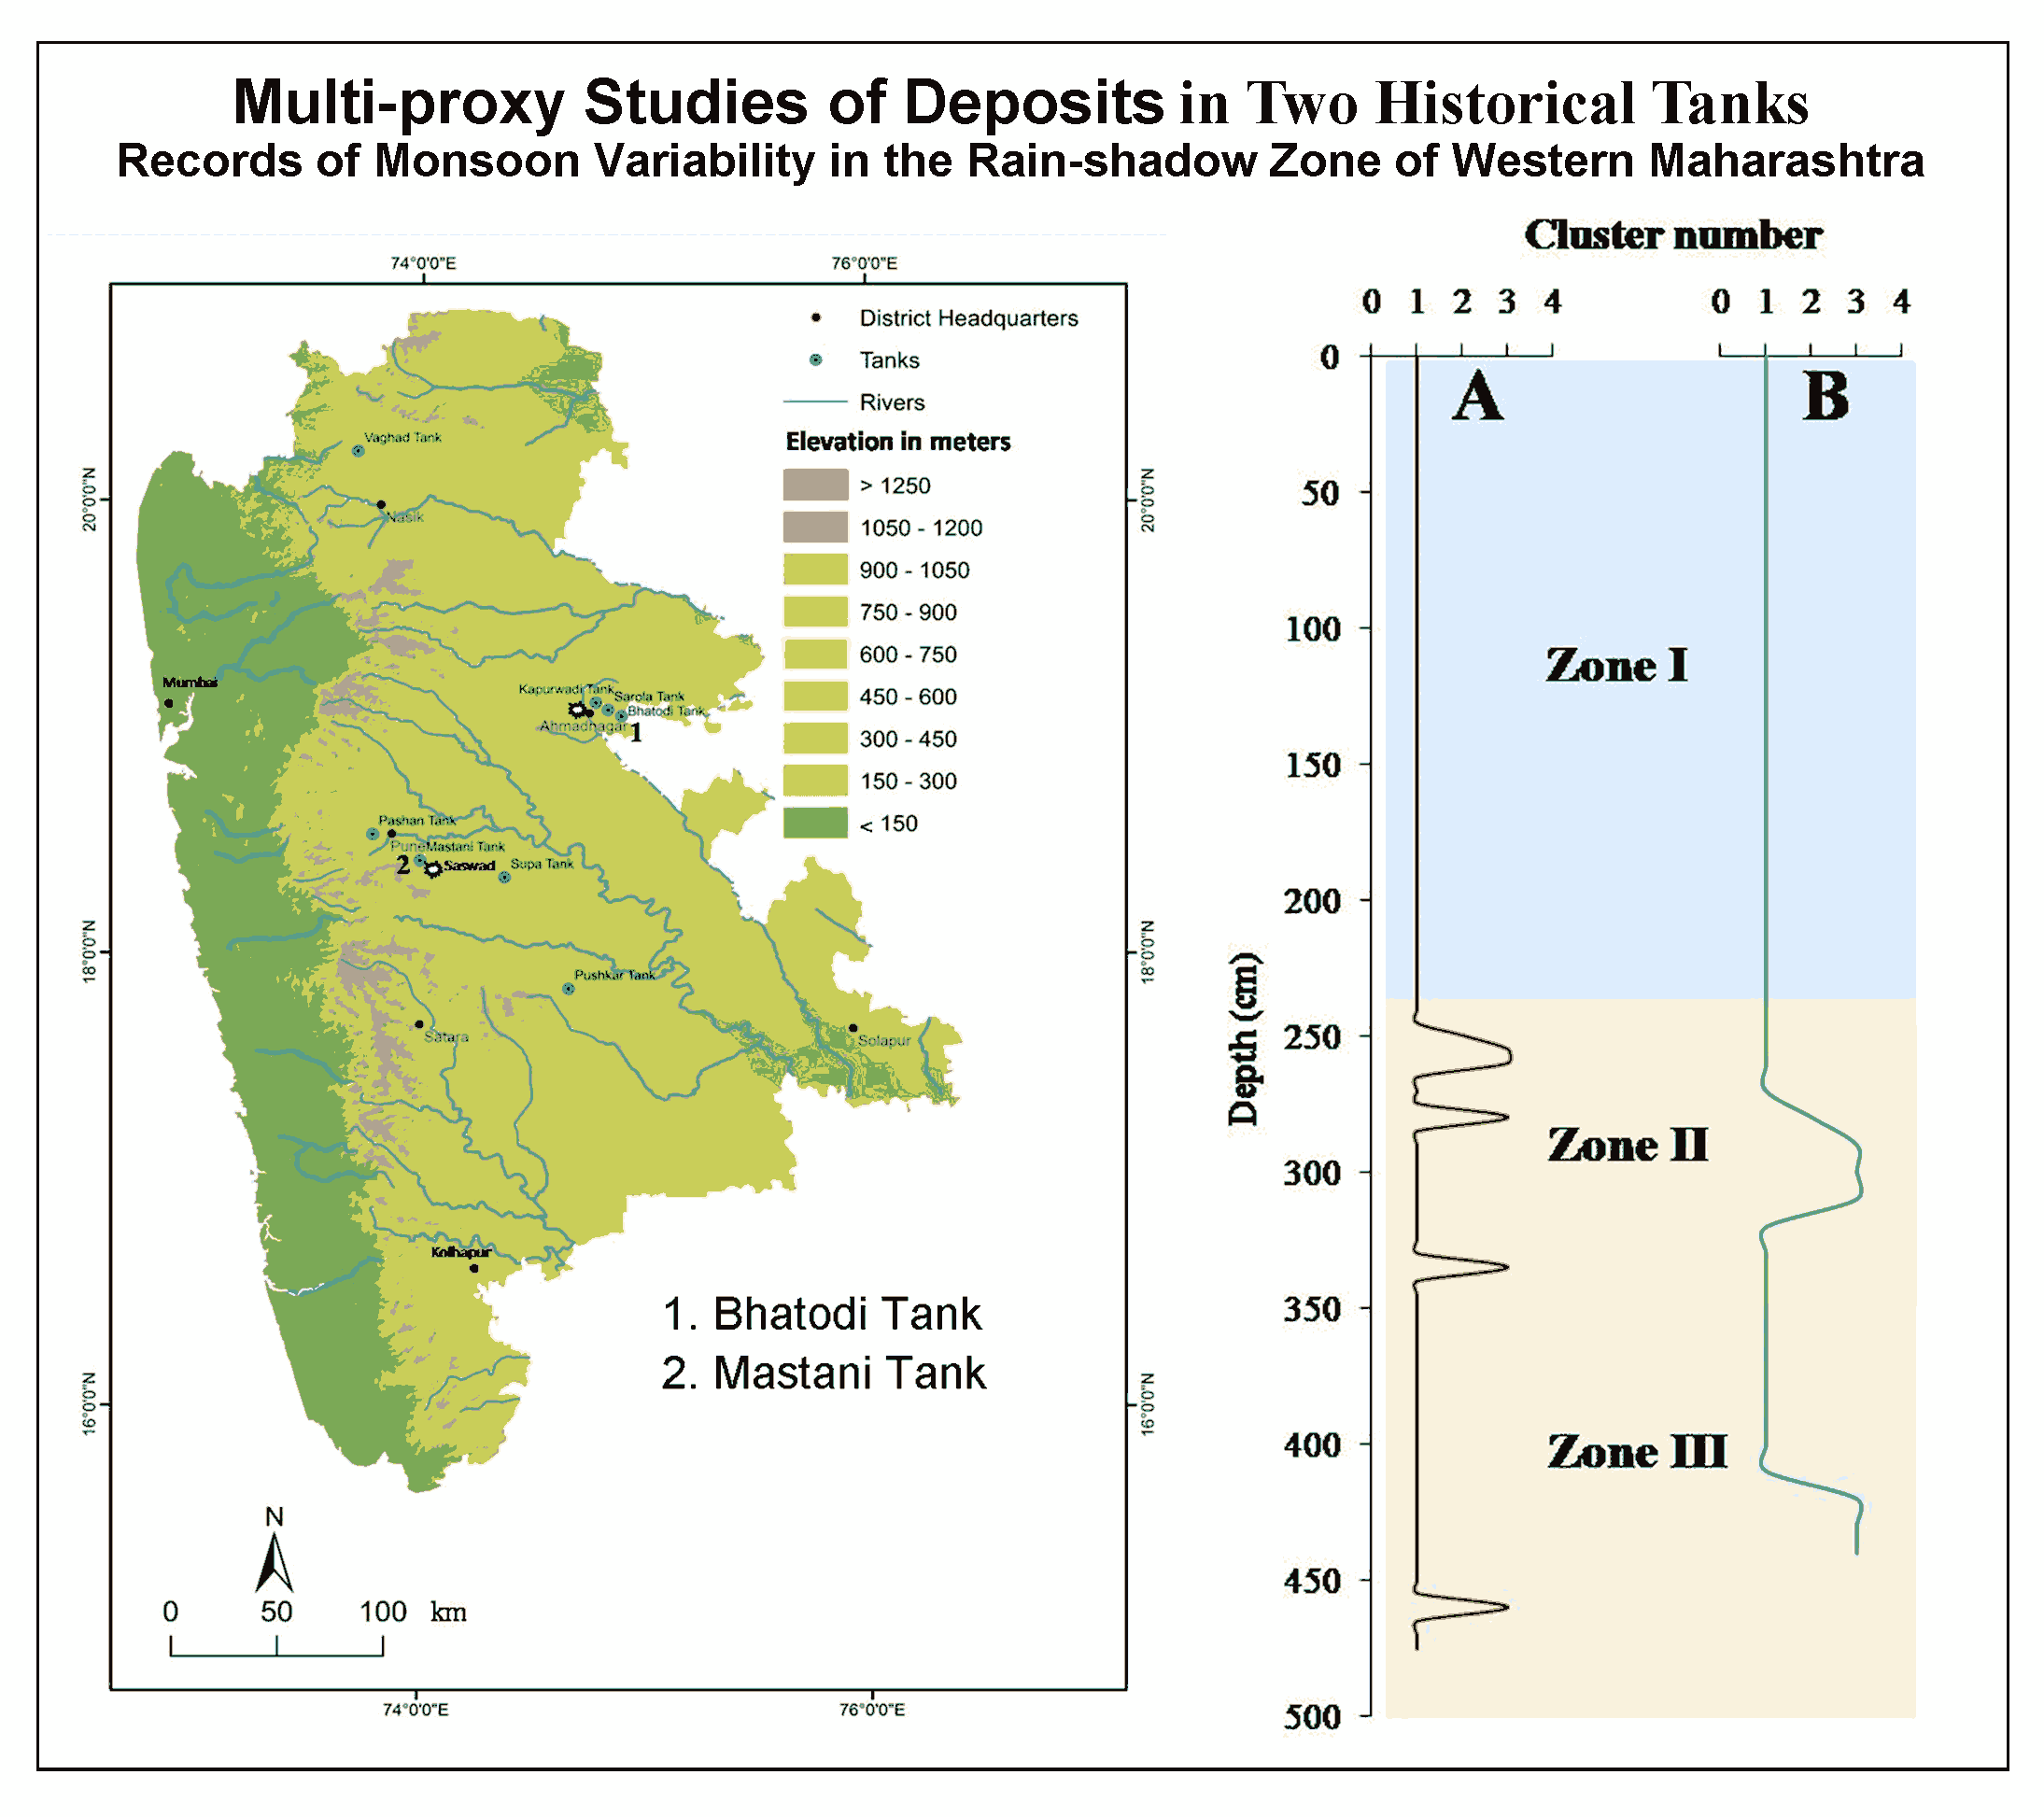 Records of Monsoon Variability in the Rain-shadow Zone of Western Maharashtra, Based on Multi-proxy Studies of Deposits in Two Historical Tanks 